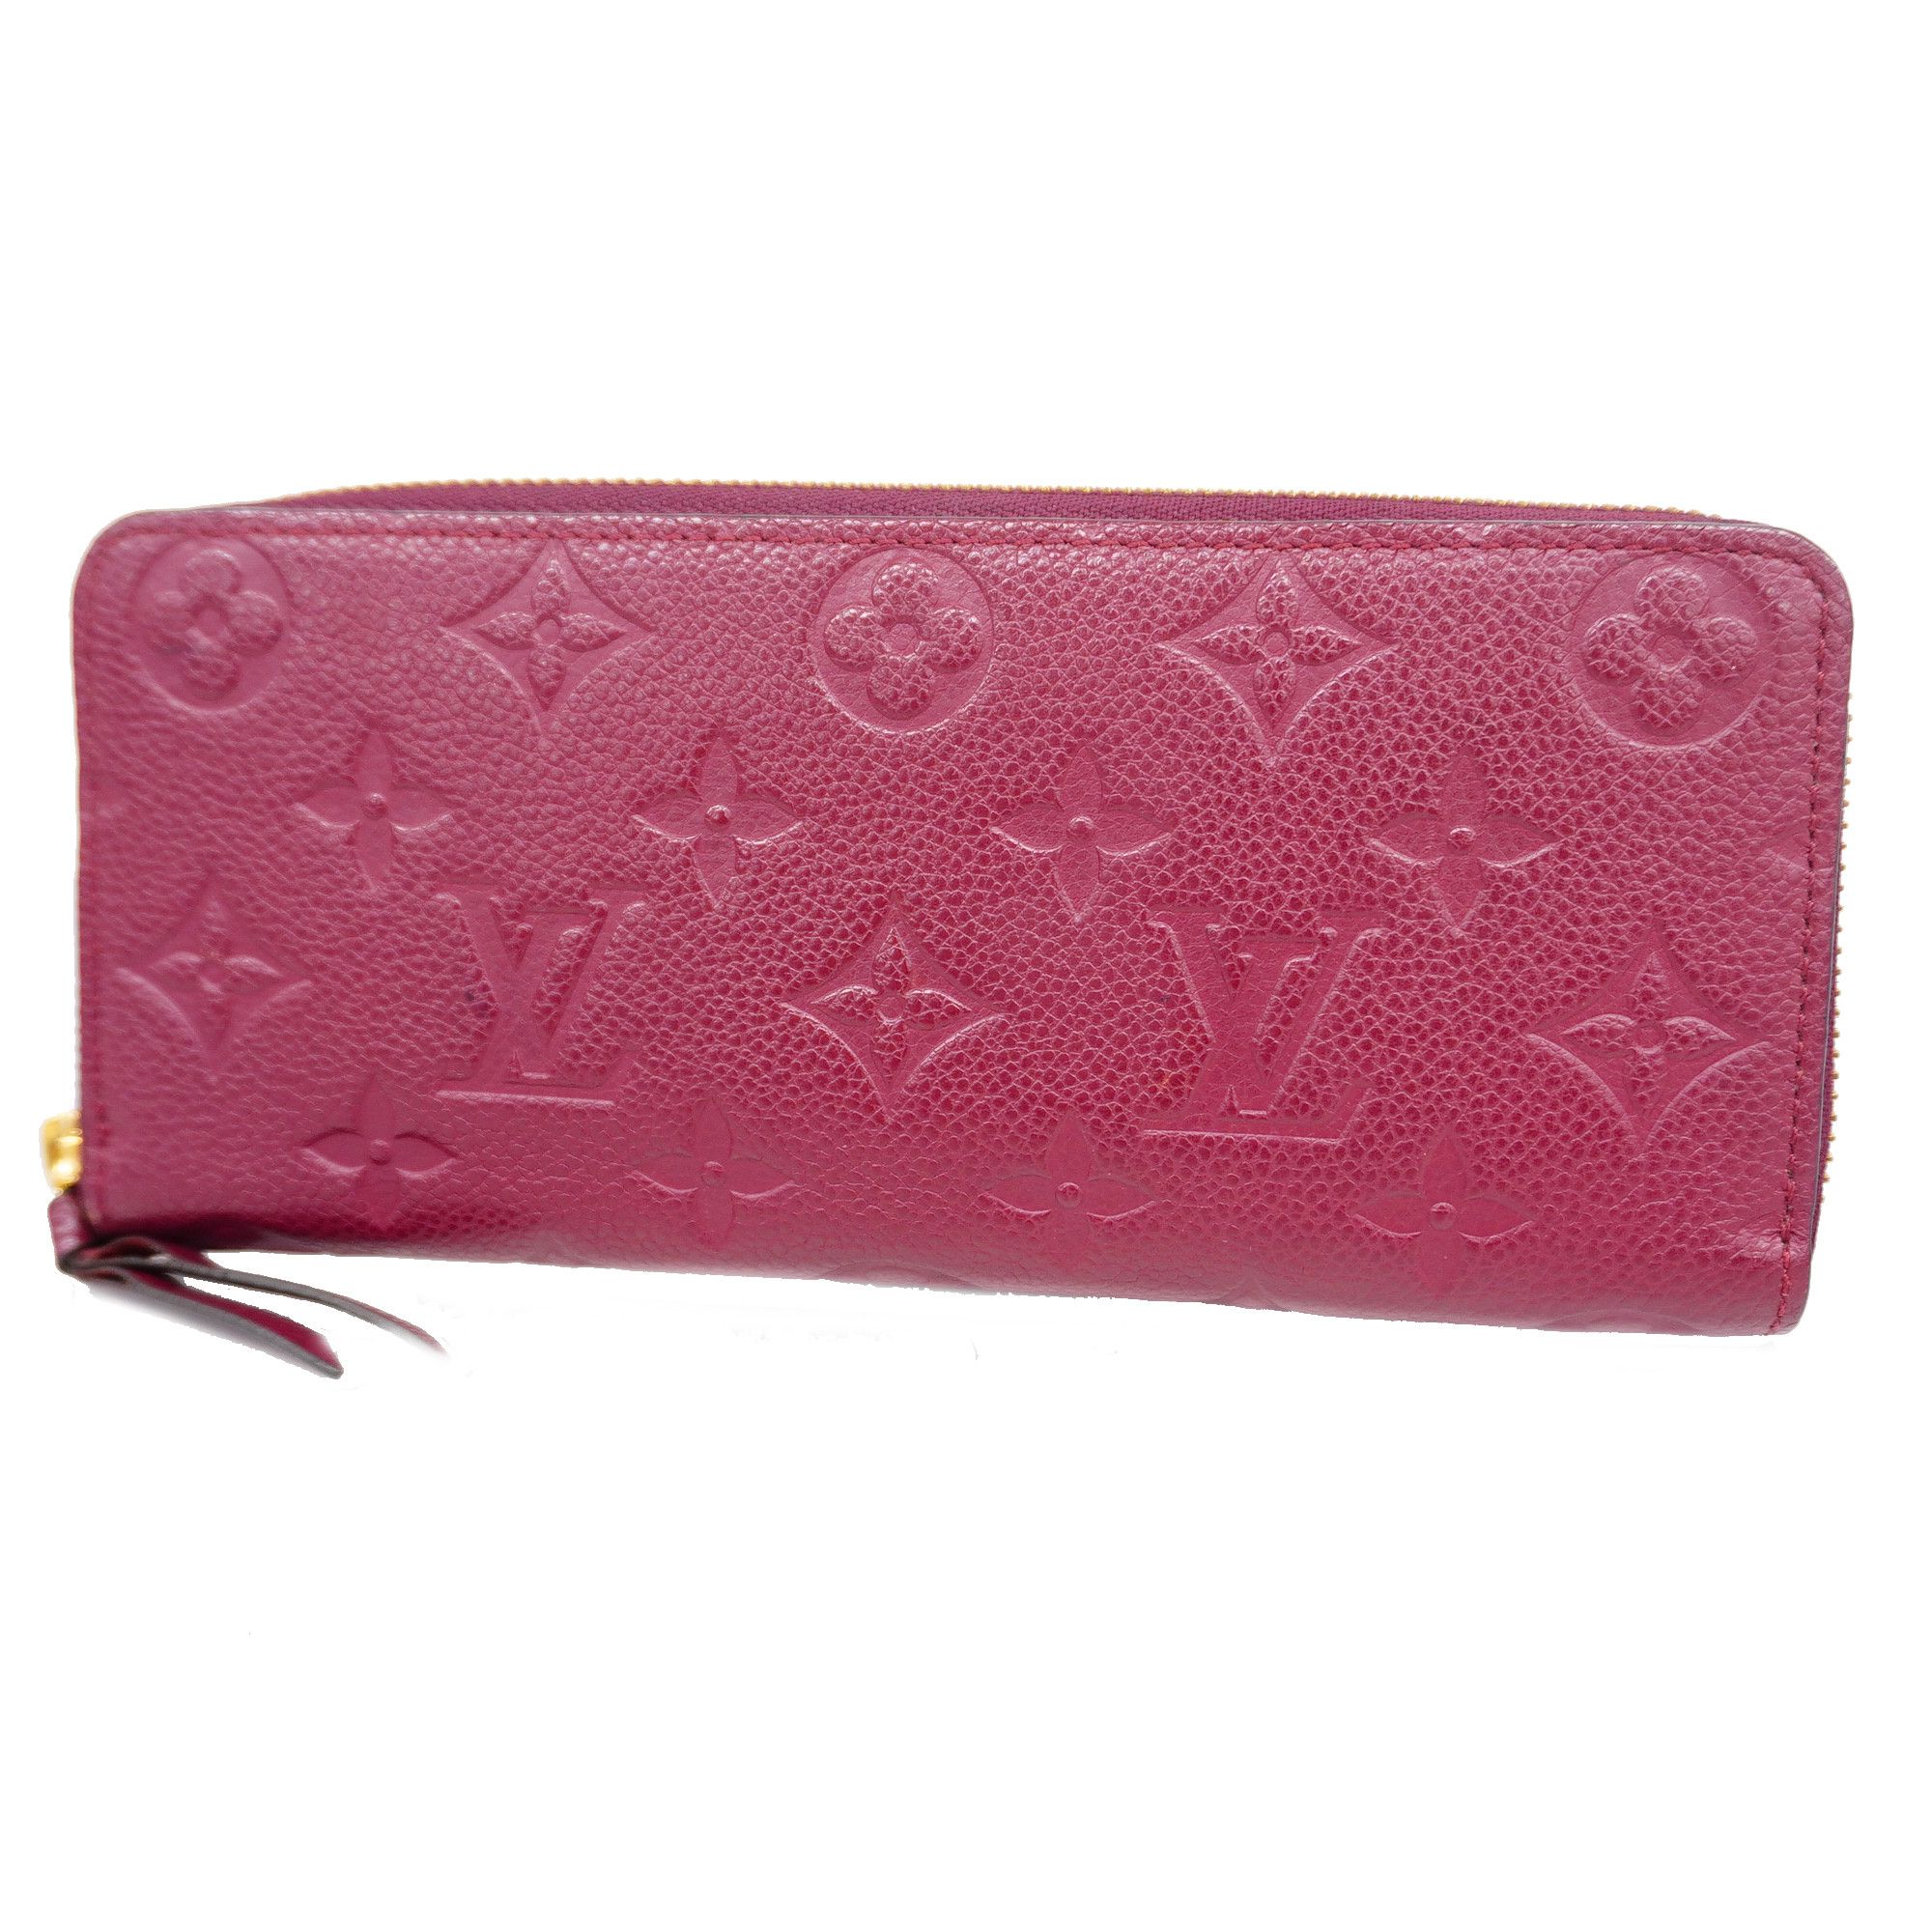 Authenticated Used LOUIS VUITTON Portefeuille Comet L-shaped long